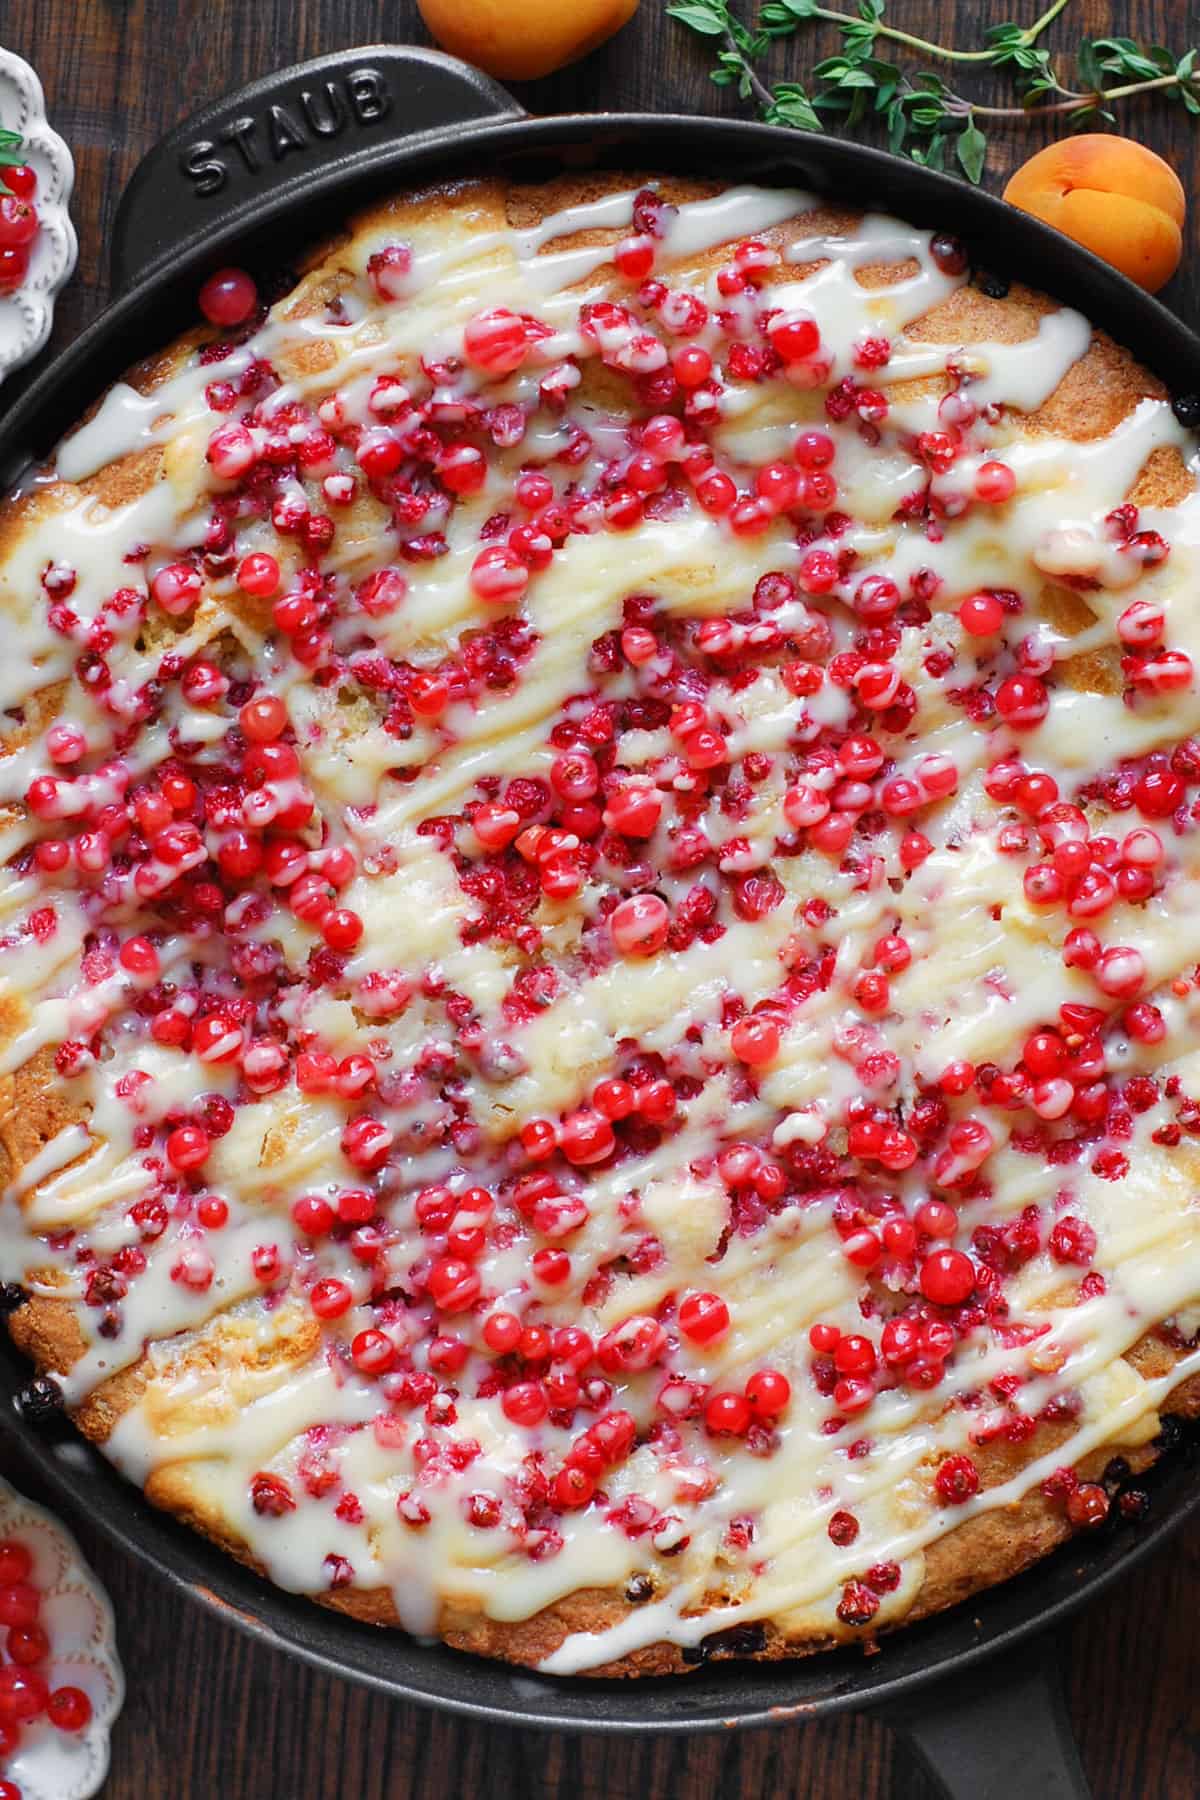 Baked Red Currant Cake with the Cream Cheese Filling and with the Cream Cheese Topping drizzled on top - in a cast iron skillet.